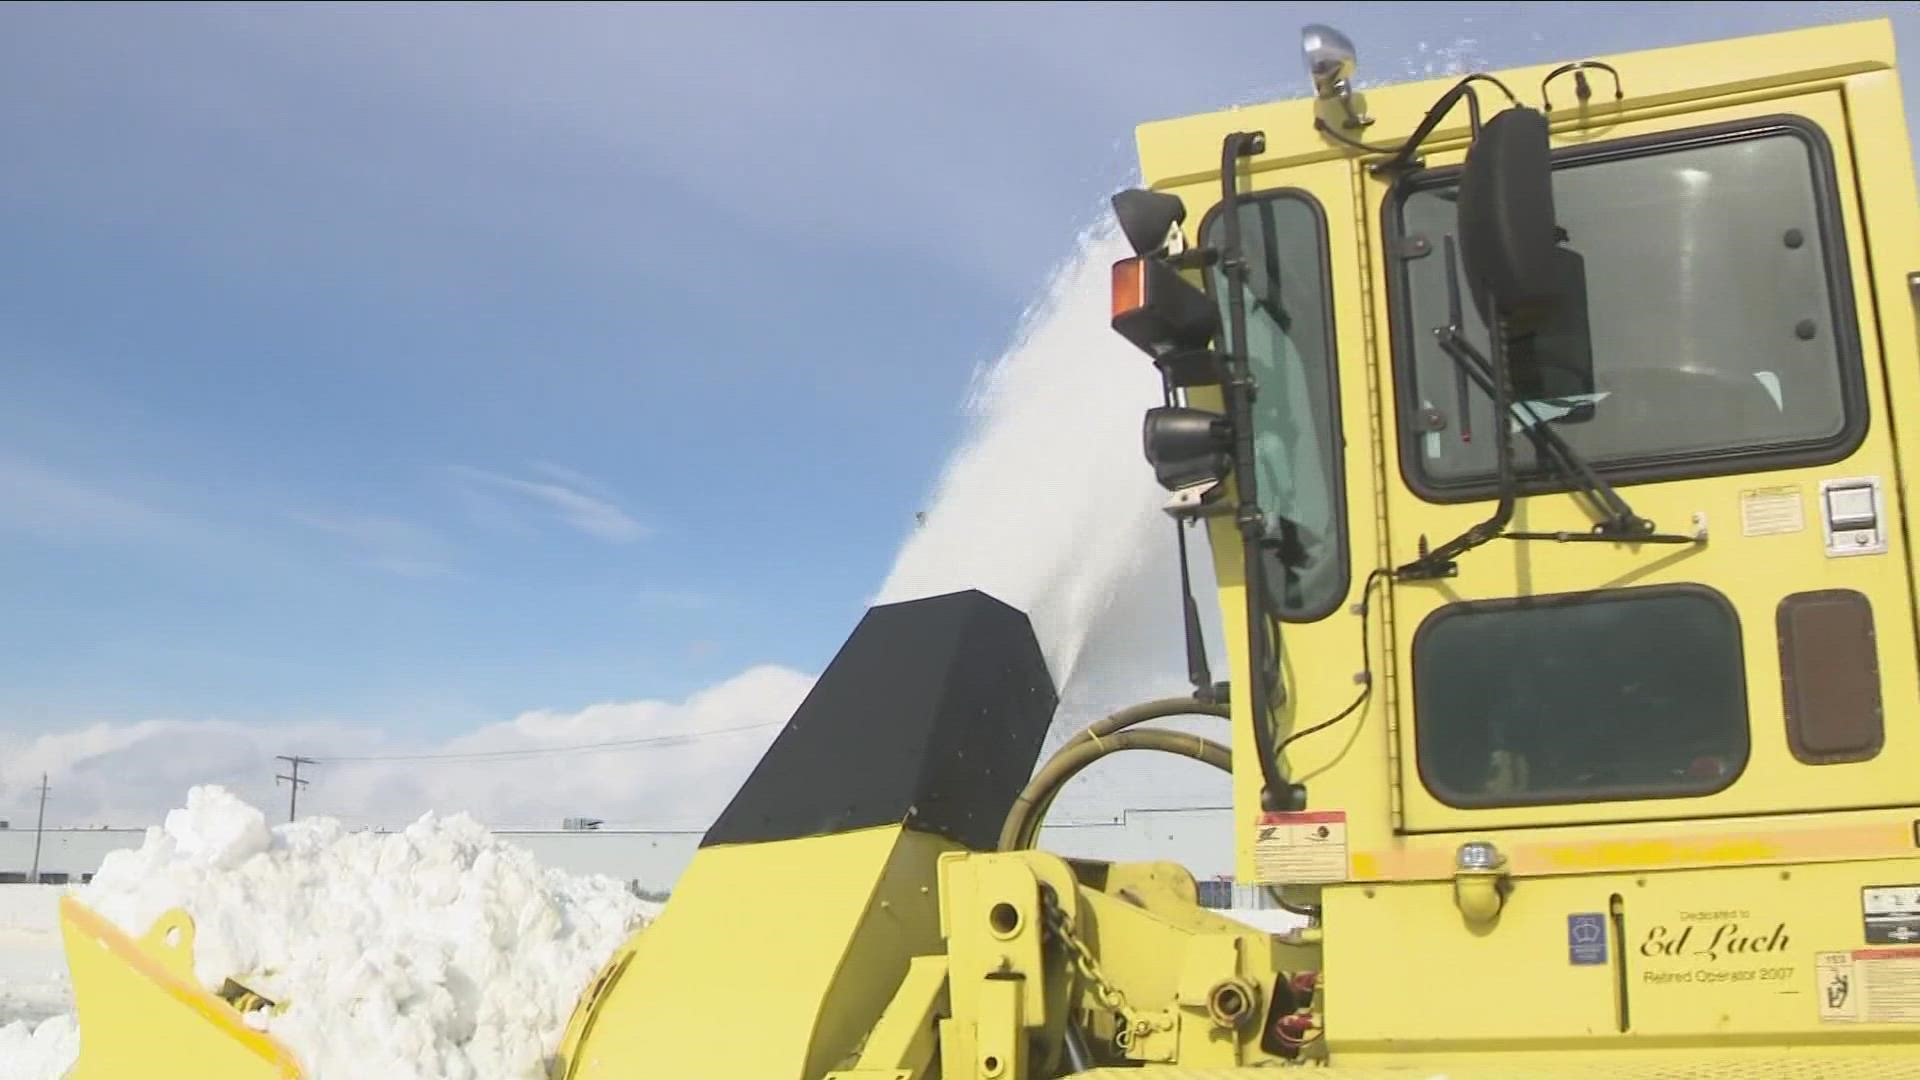 Airfield Superintendent Joe Guarino says ice on the runways is a concern with freezing rain, but they're prepared with the proper equipment to clear it.